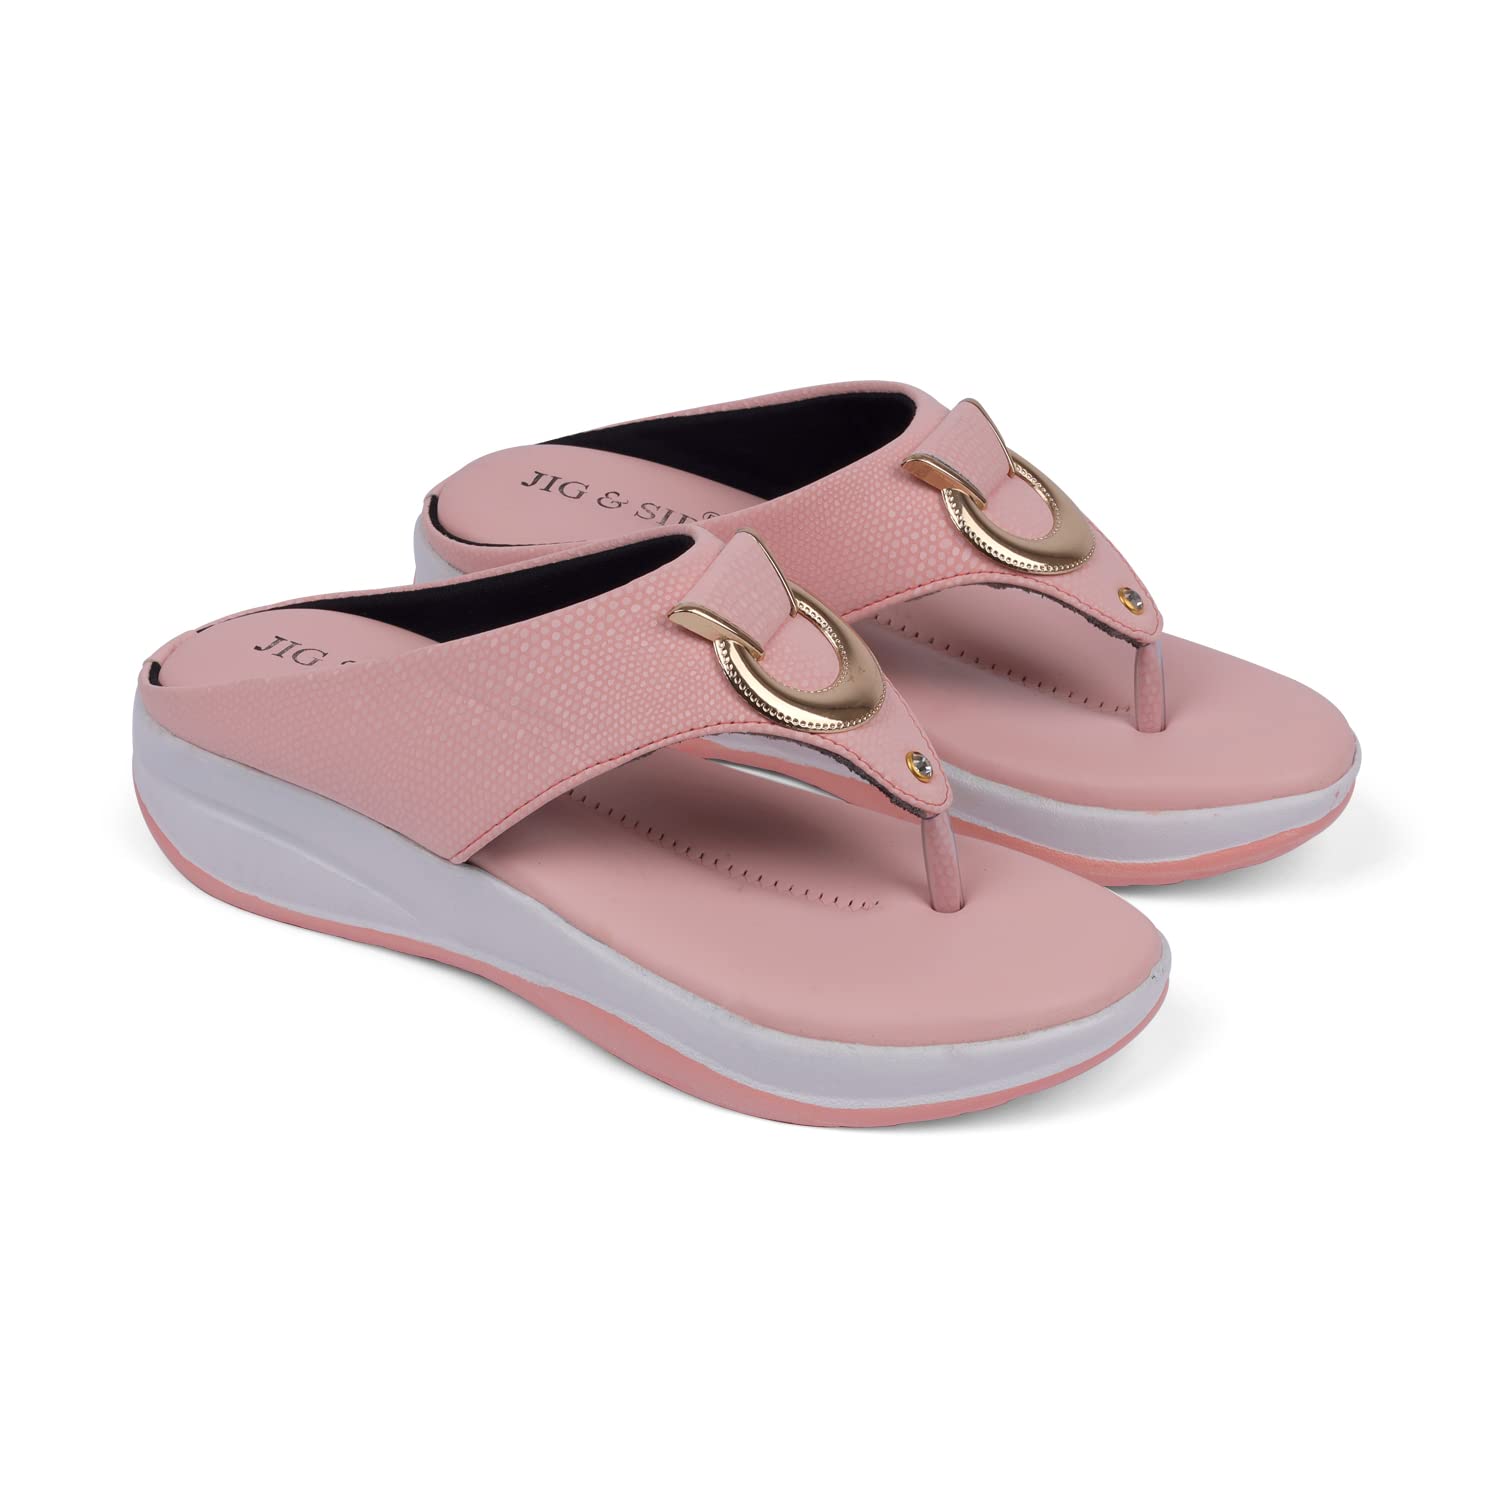 JIG & SID Women's and Girl’s TPR Sole Synthetic Platform Heel 2 Inch Wedges Slip on Casual Flats Flip Flops/Super Soft, Lightweight, Fashionable Slippers/Stylish & Comfy Sandals/Footwear -  fashion slippers in Sri Lanka from Arcade Online Shopping - Just Rs. 5099!